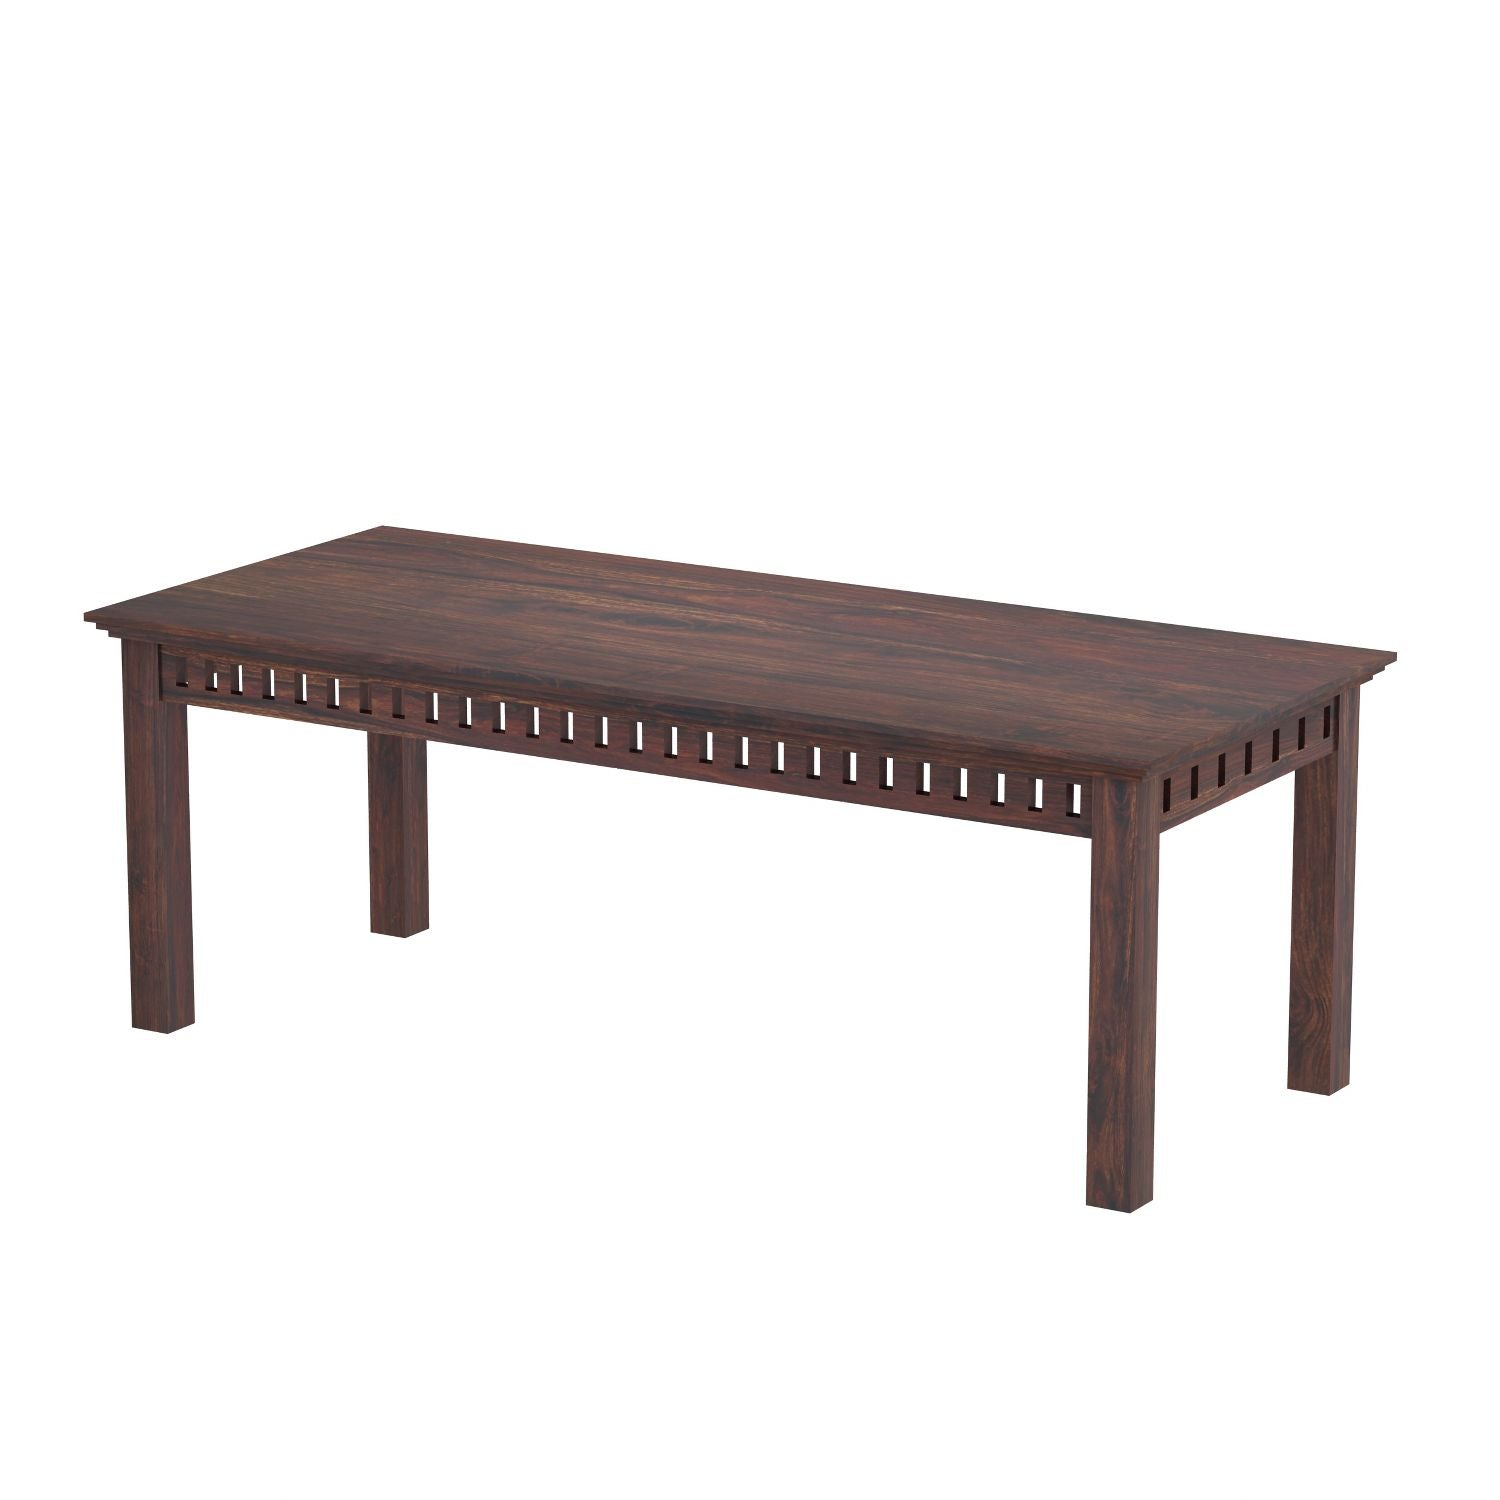 Amer Solid Sheesham Wood 8 Seater Dining Set With Bench (With Cushion, Walnut Finish)